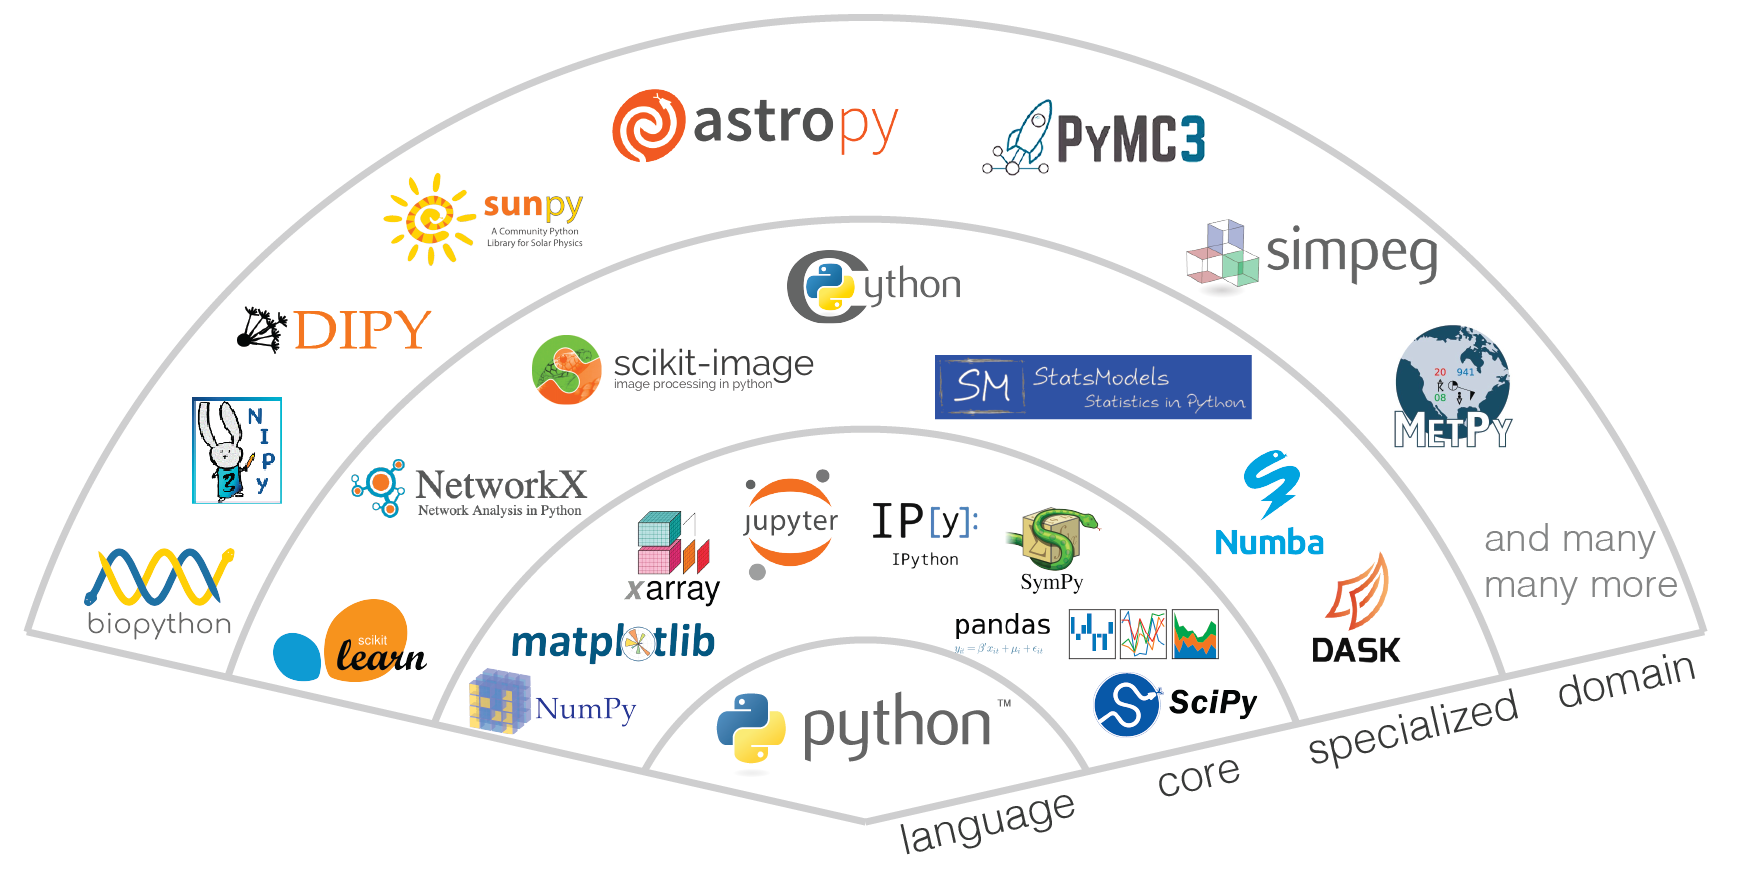 Image showing the tiers of software in the python ecosystem starting with Python itself and as you move out packages become more domain specific. In this image packages like xarray and numpy are considered core to scientific python. Packages and distributions like astropy, simpeg and metpy are considered to be domain specific.